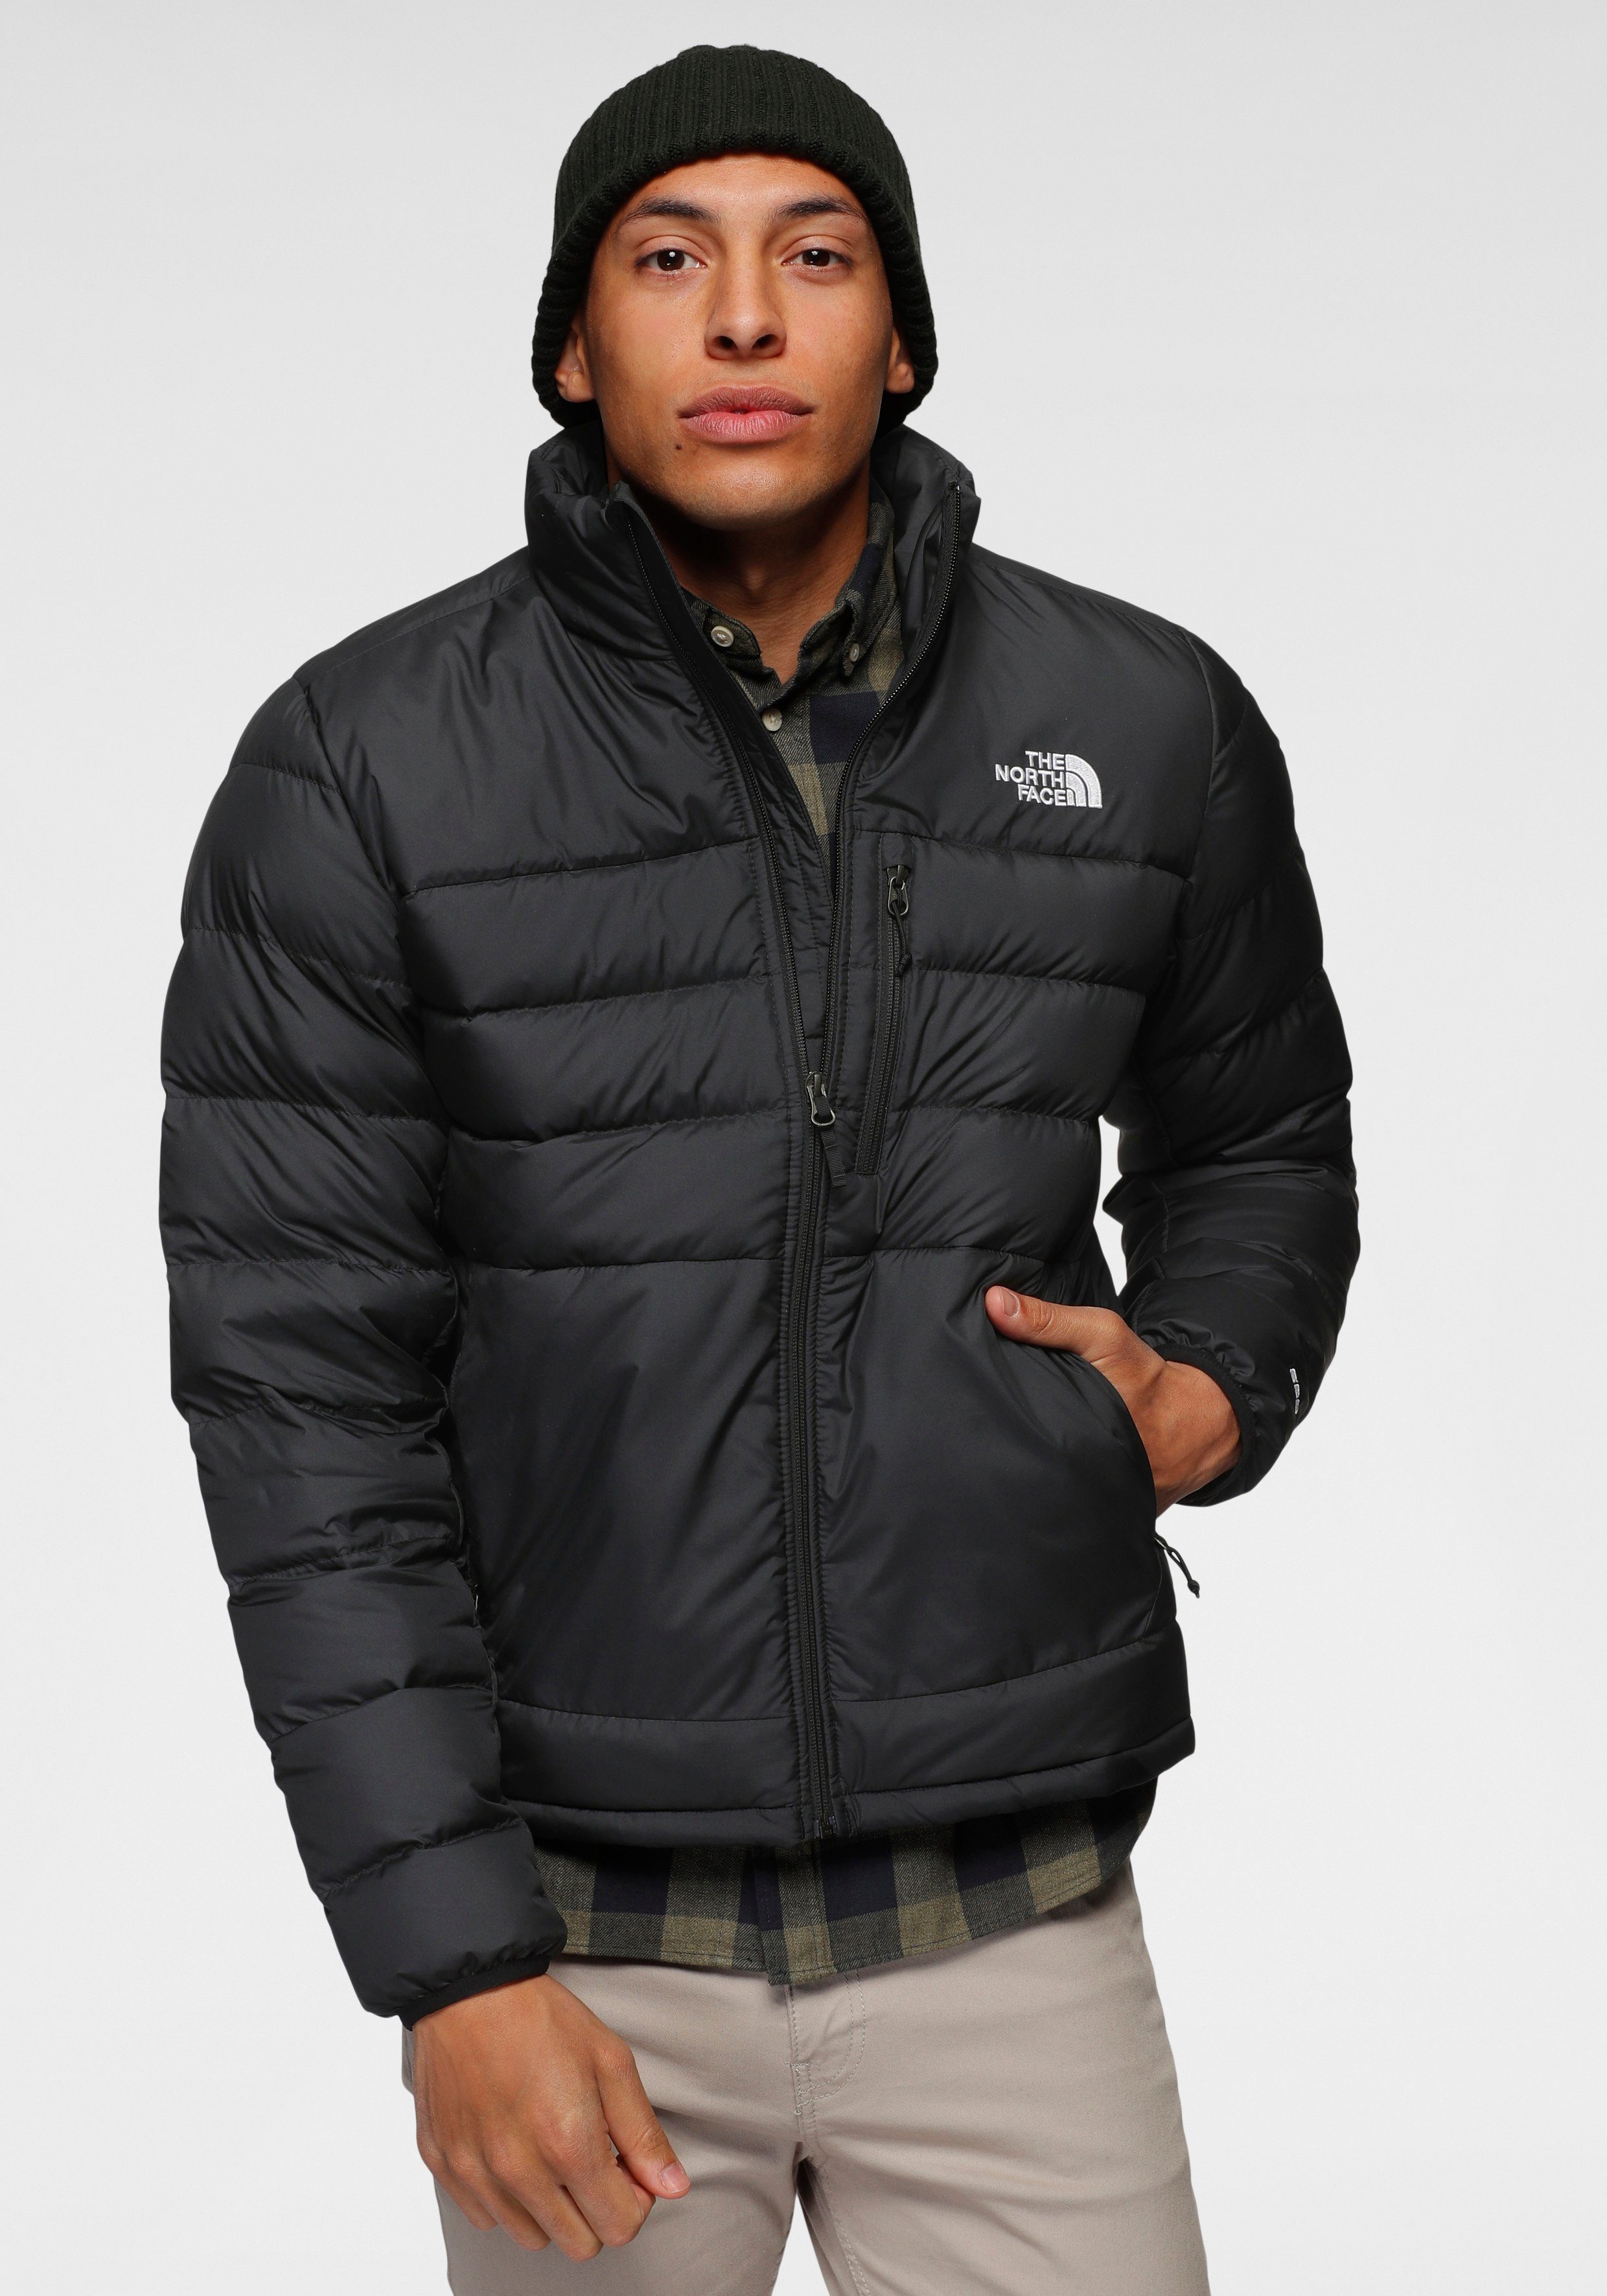 The North Face Steppjacke »ACONCAGUA« online kaufen | OTTO